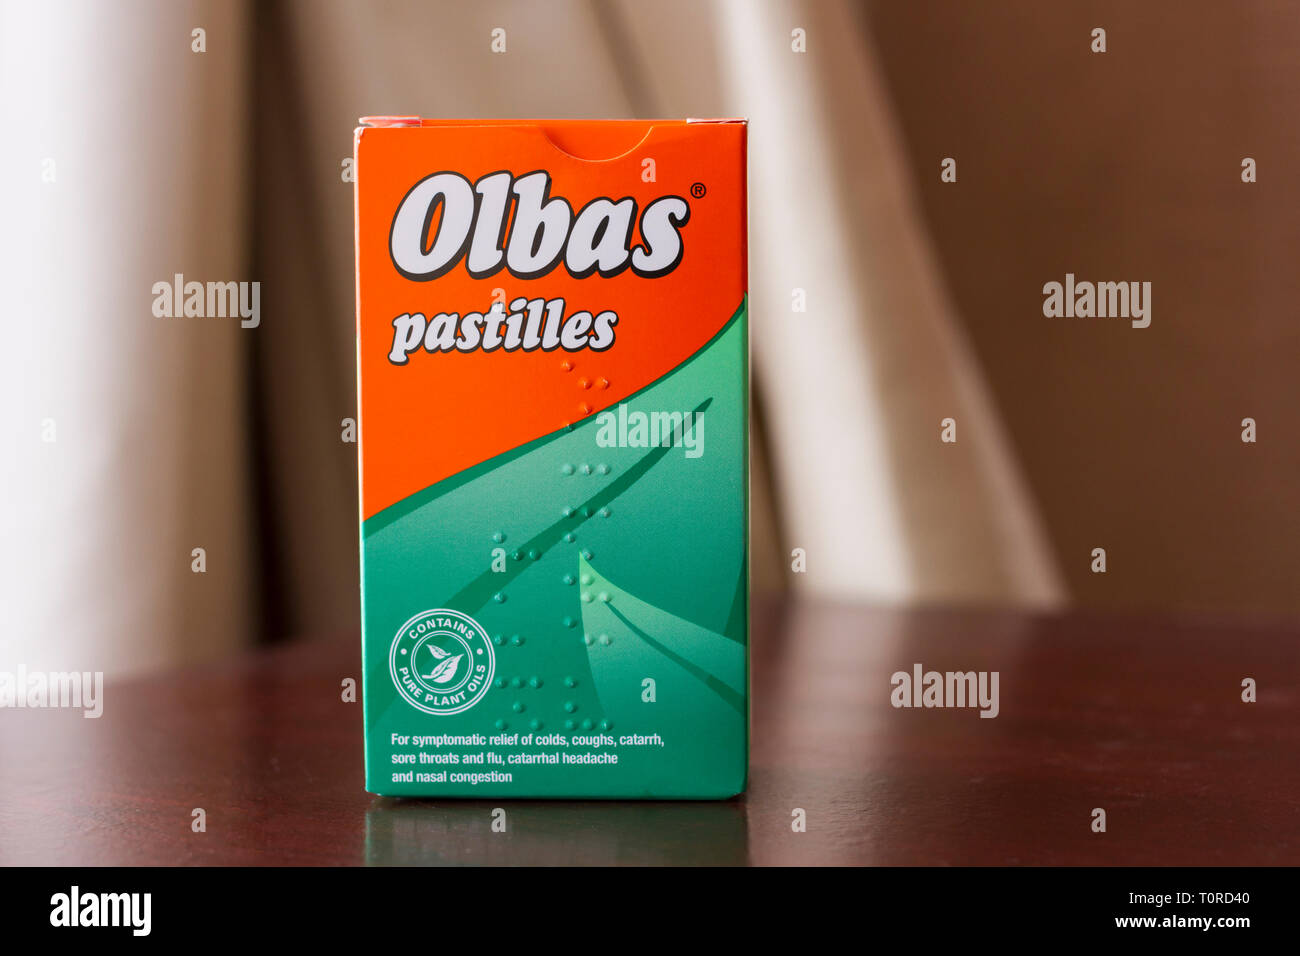 Box of Olbas pastilles for sore throats, coughs, colds and nasal congestion. United Kingdom Stock Photo